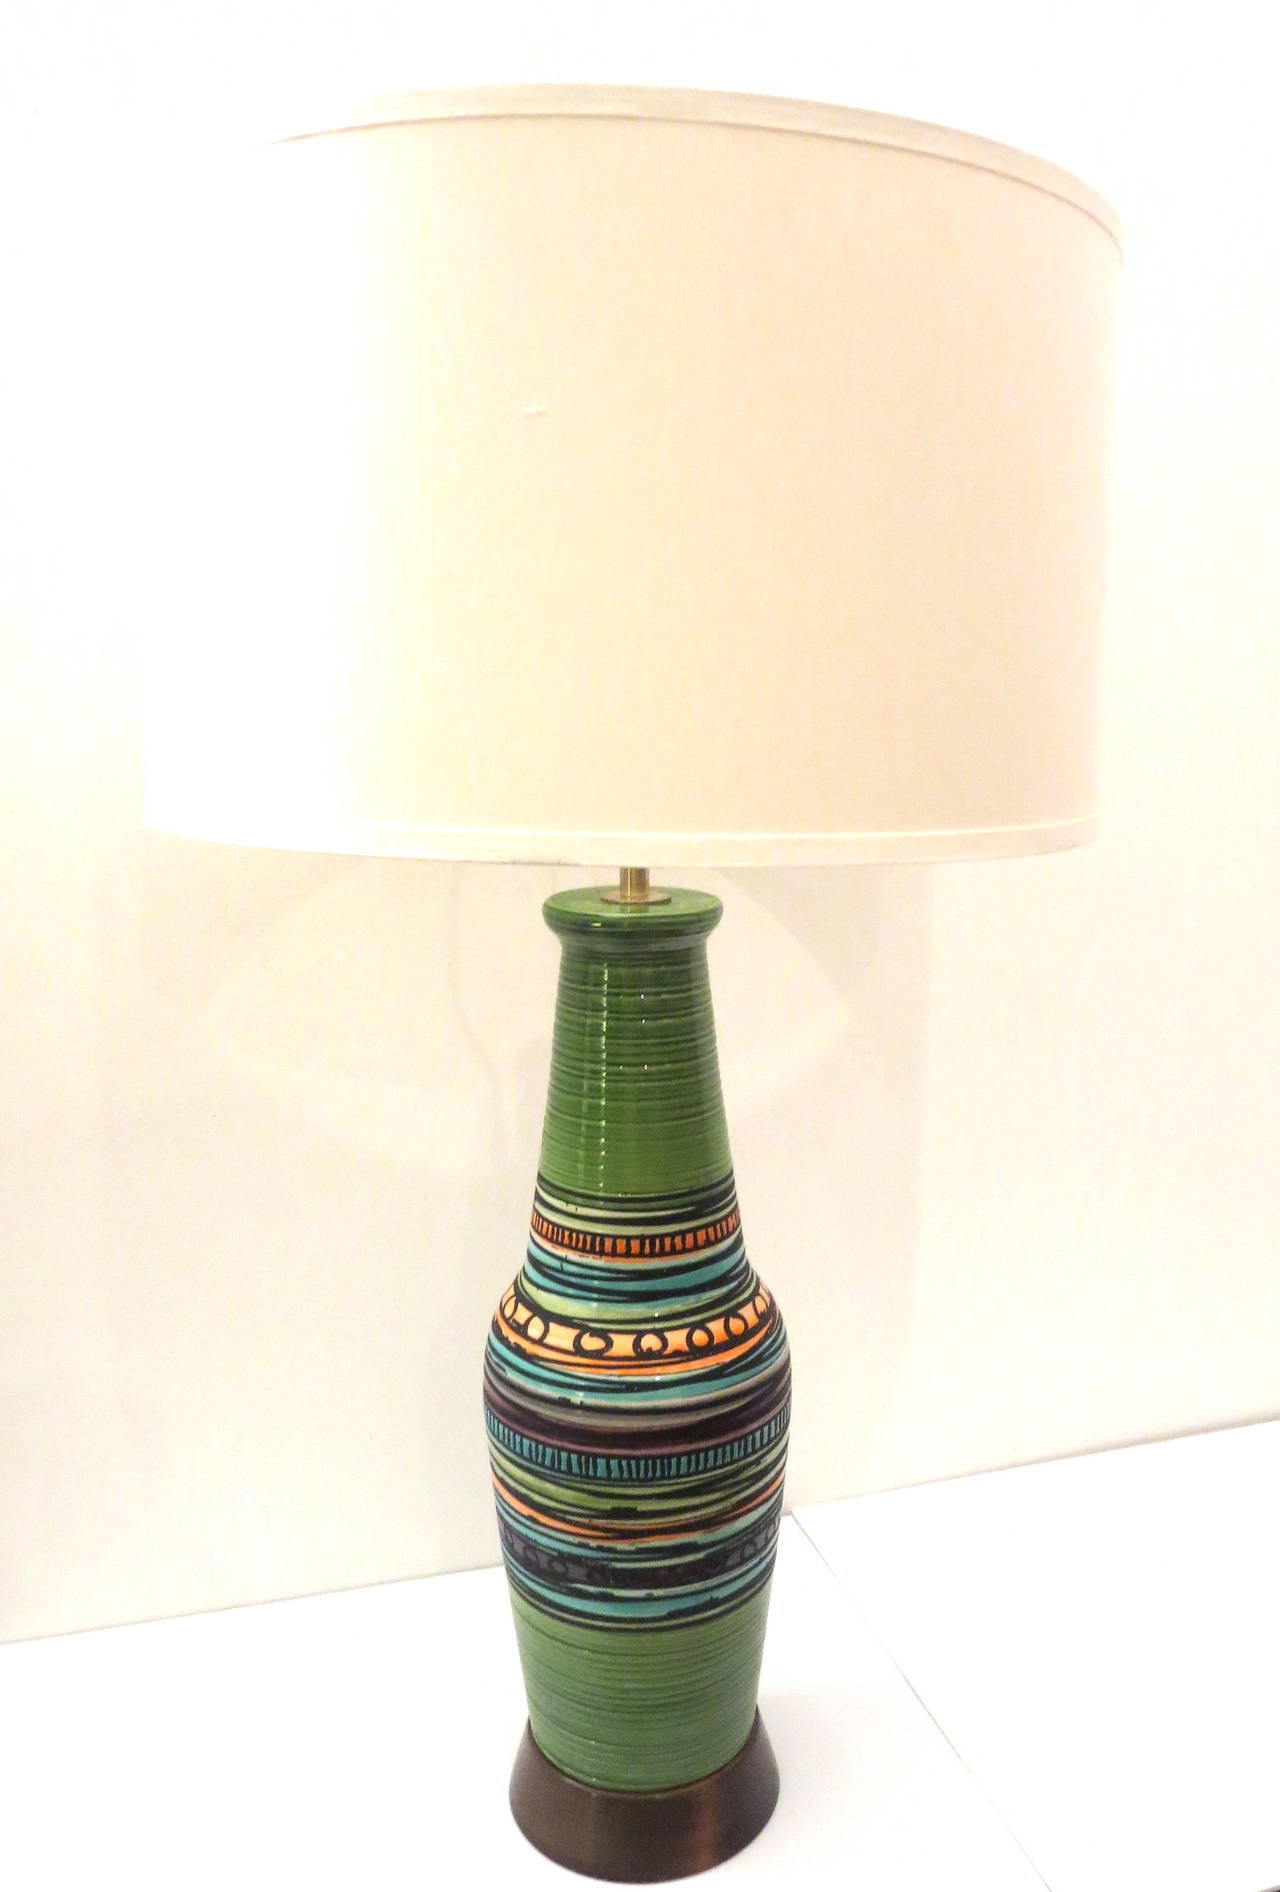 Striking tall colorfull table ceramic base, Made in Italy circa 50s hand painted nice condition sitting on a solid walnut base with polished brass fittings ,I have cleaned and opened the lamp for cleanning its rewired no chips or cracks and in